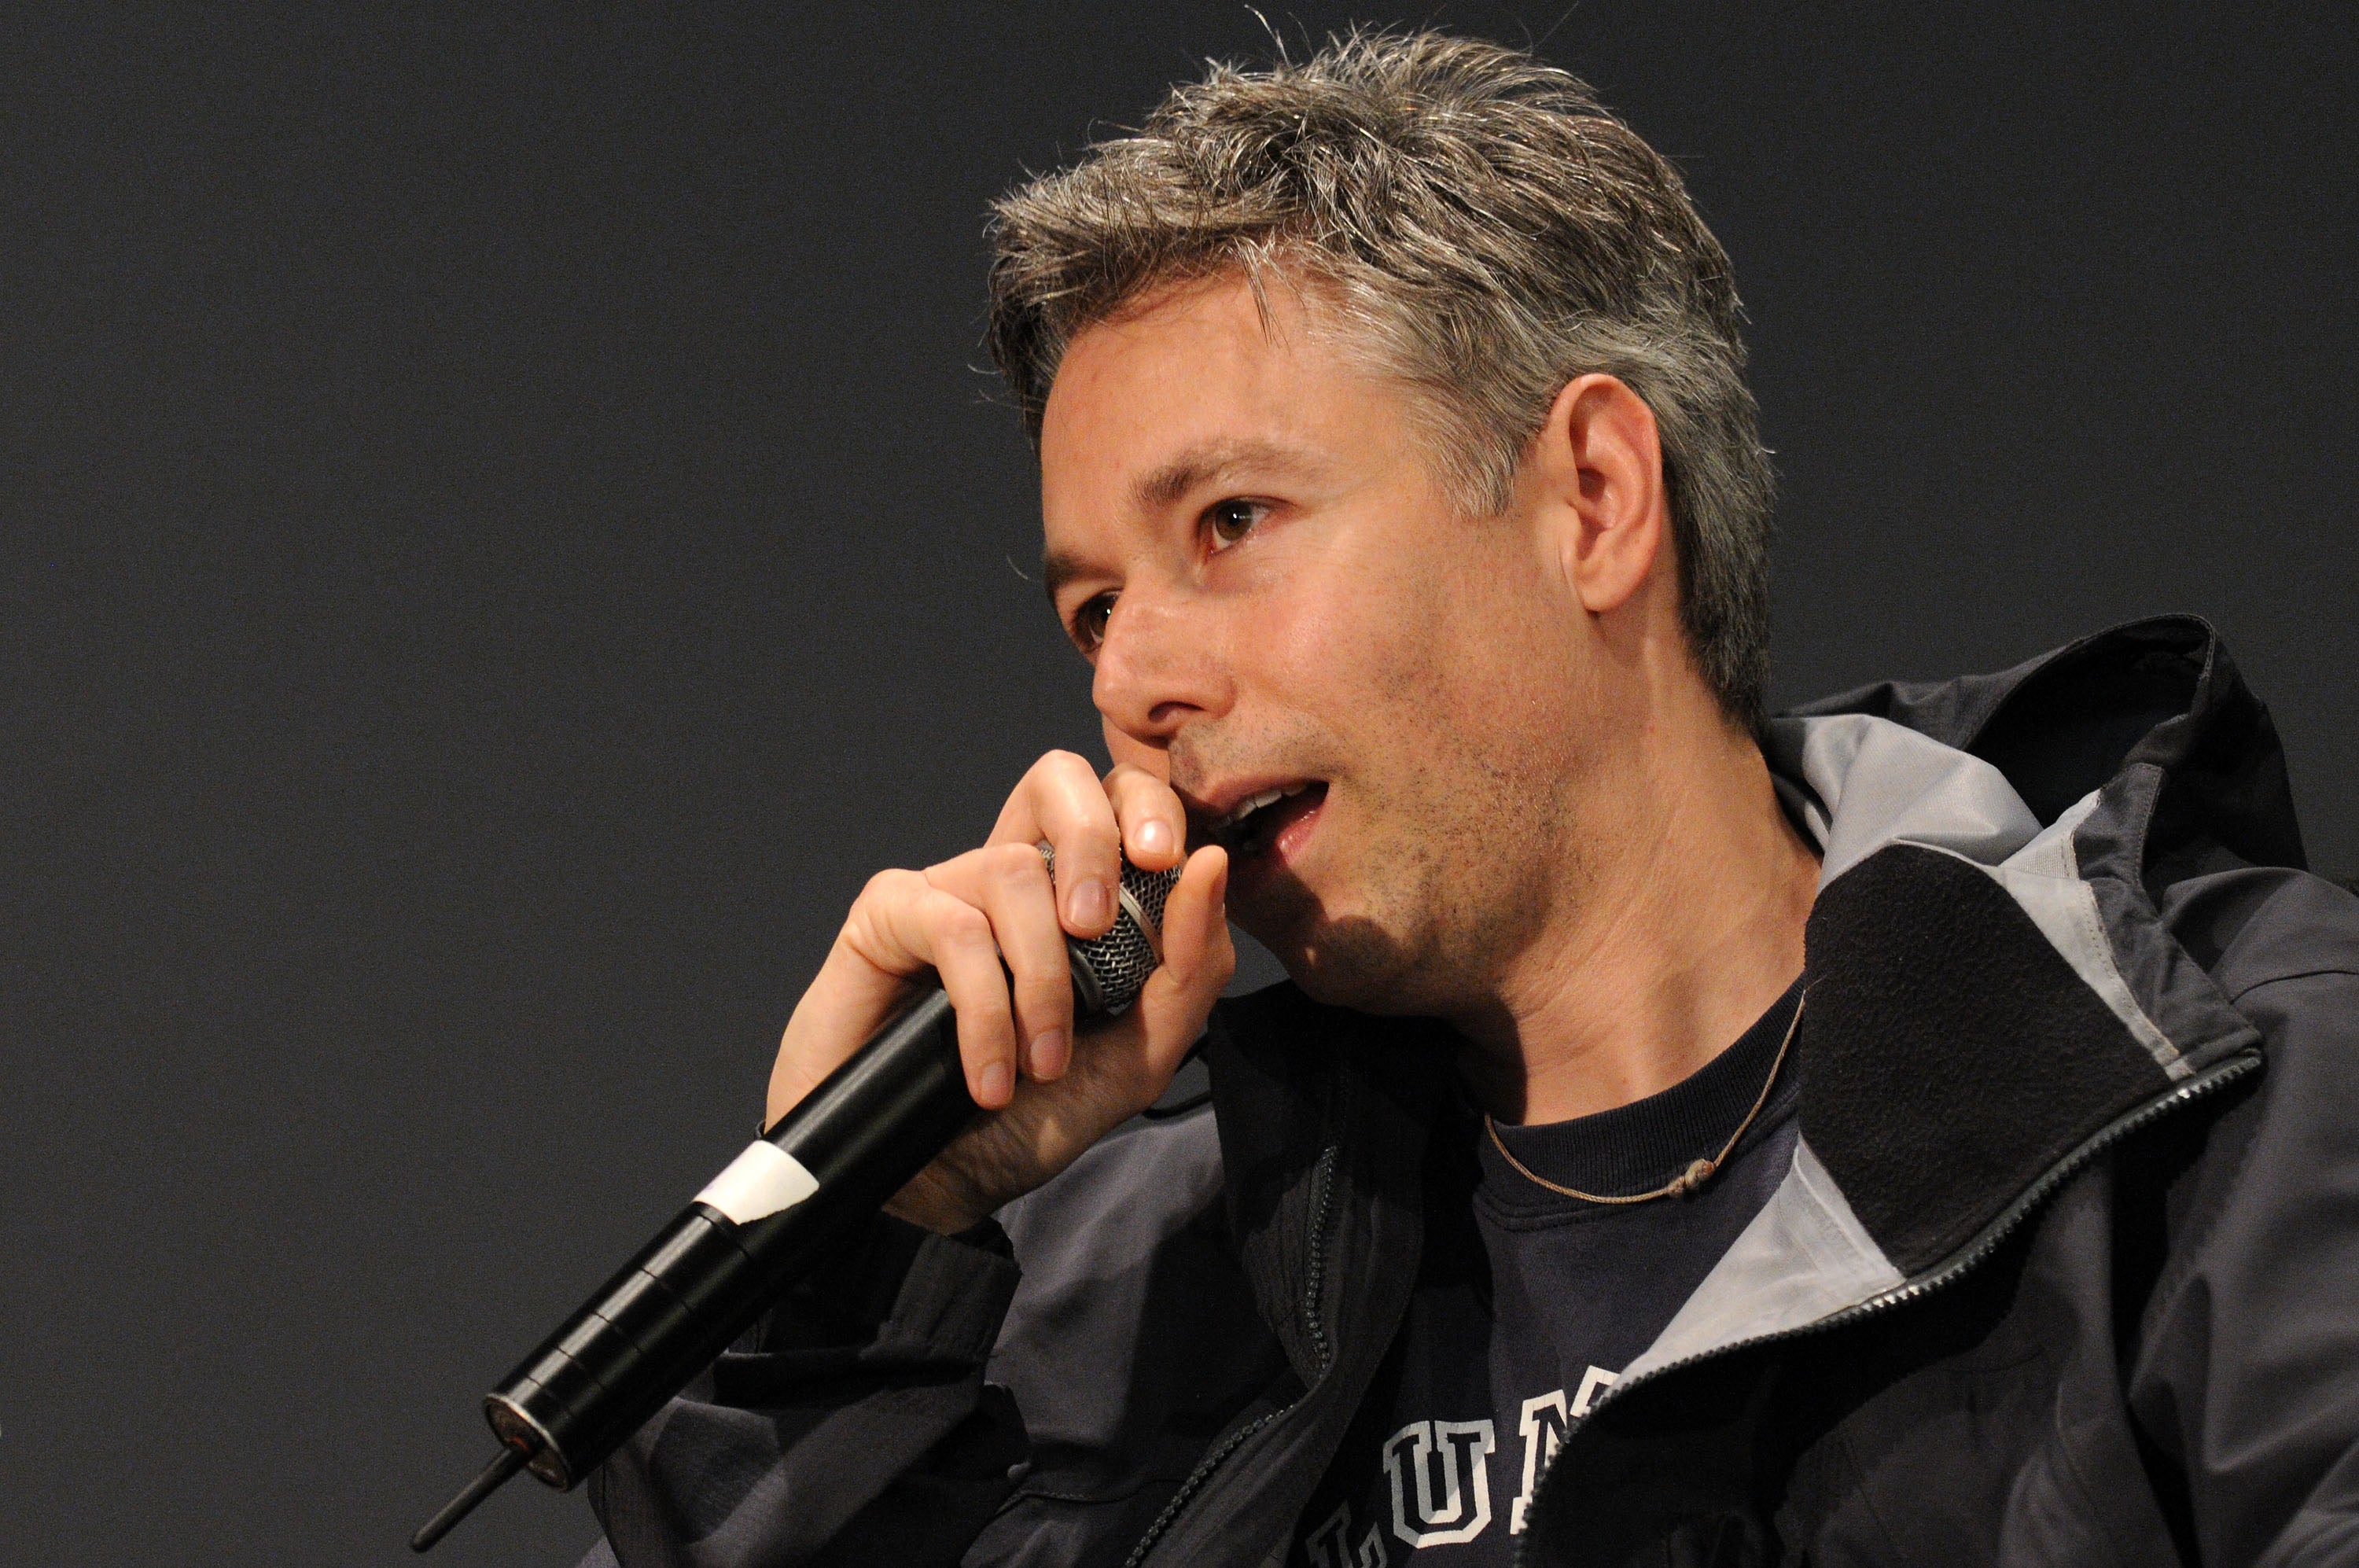 Adam Yauch of the Beastie Boys, Dead at 47